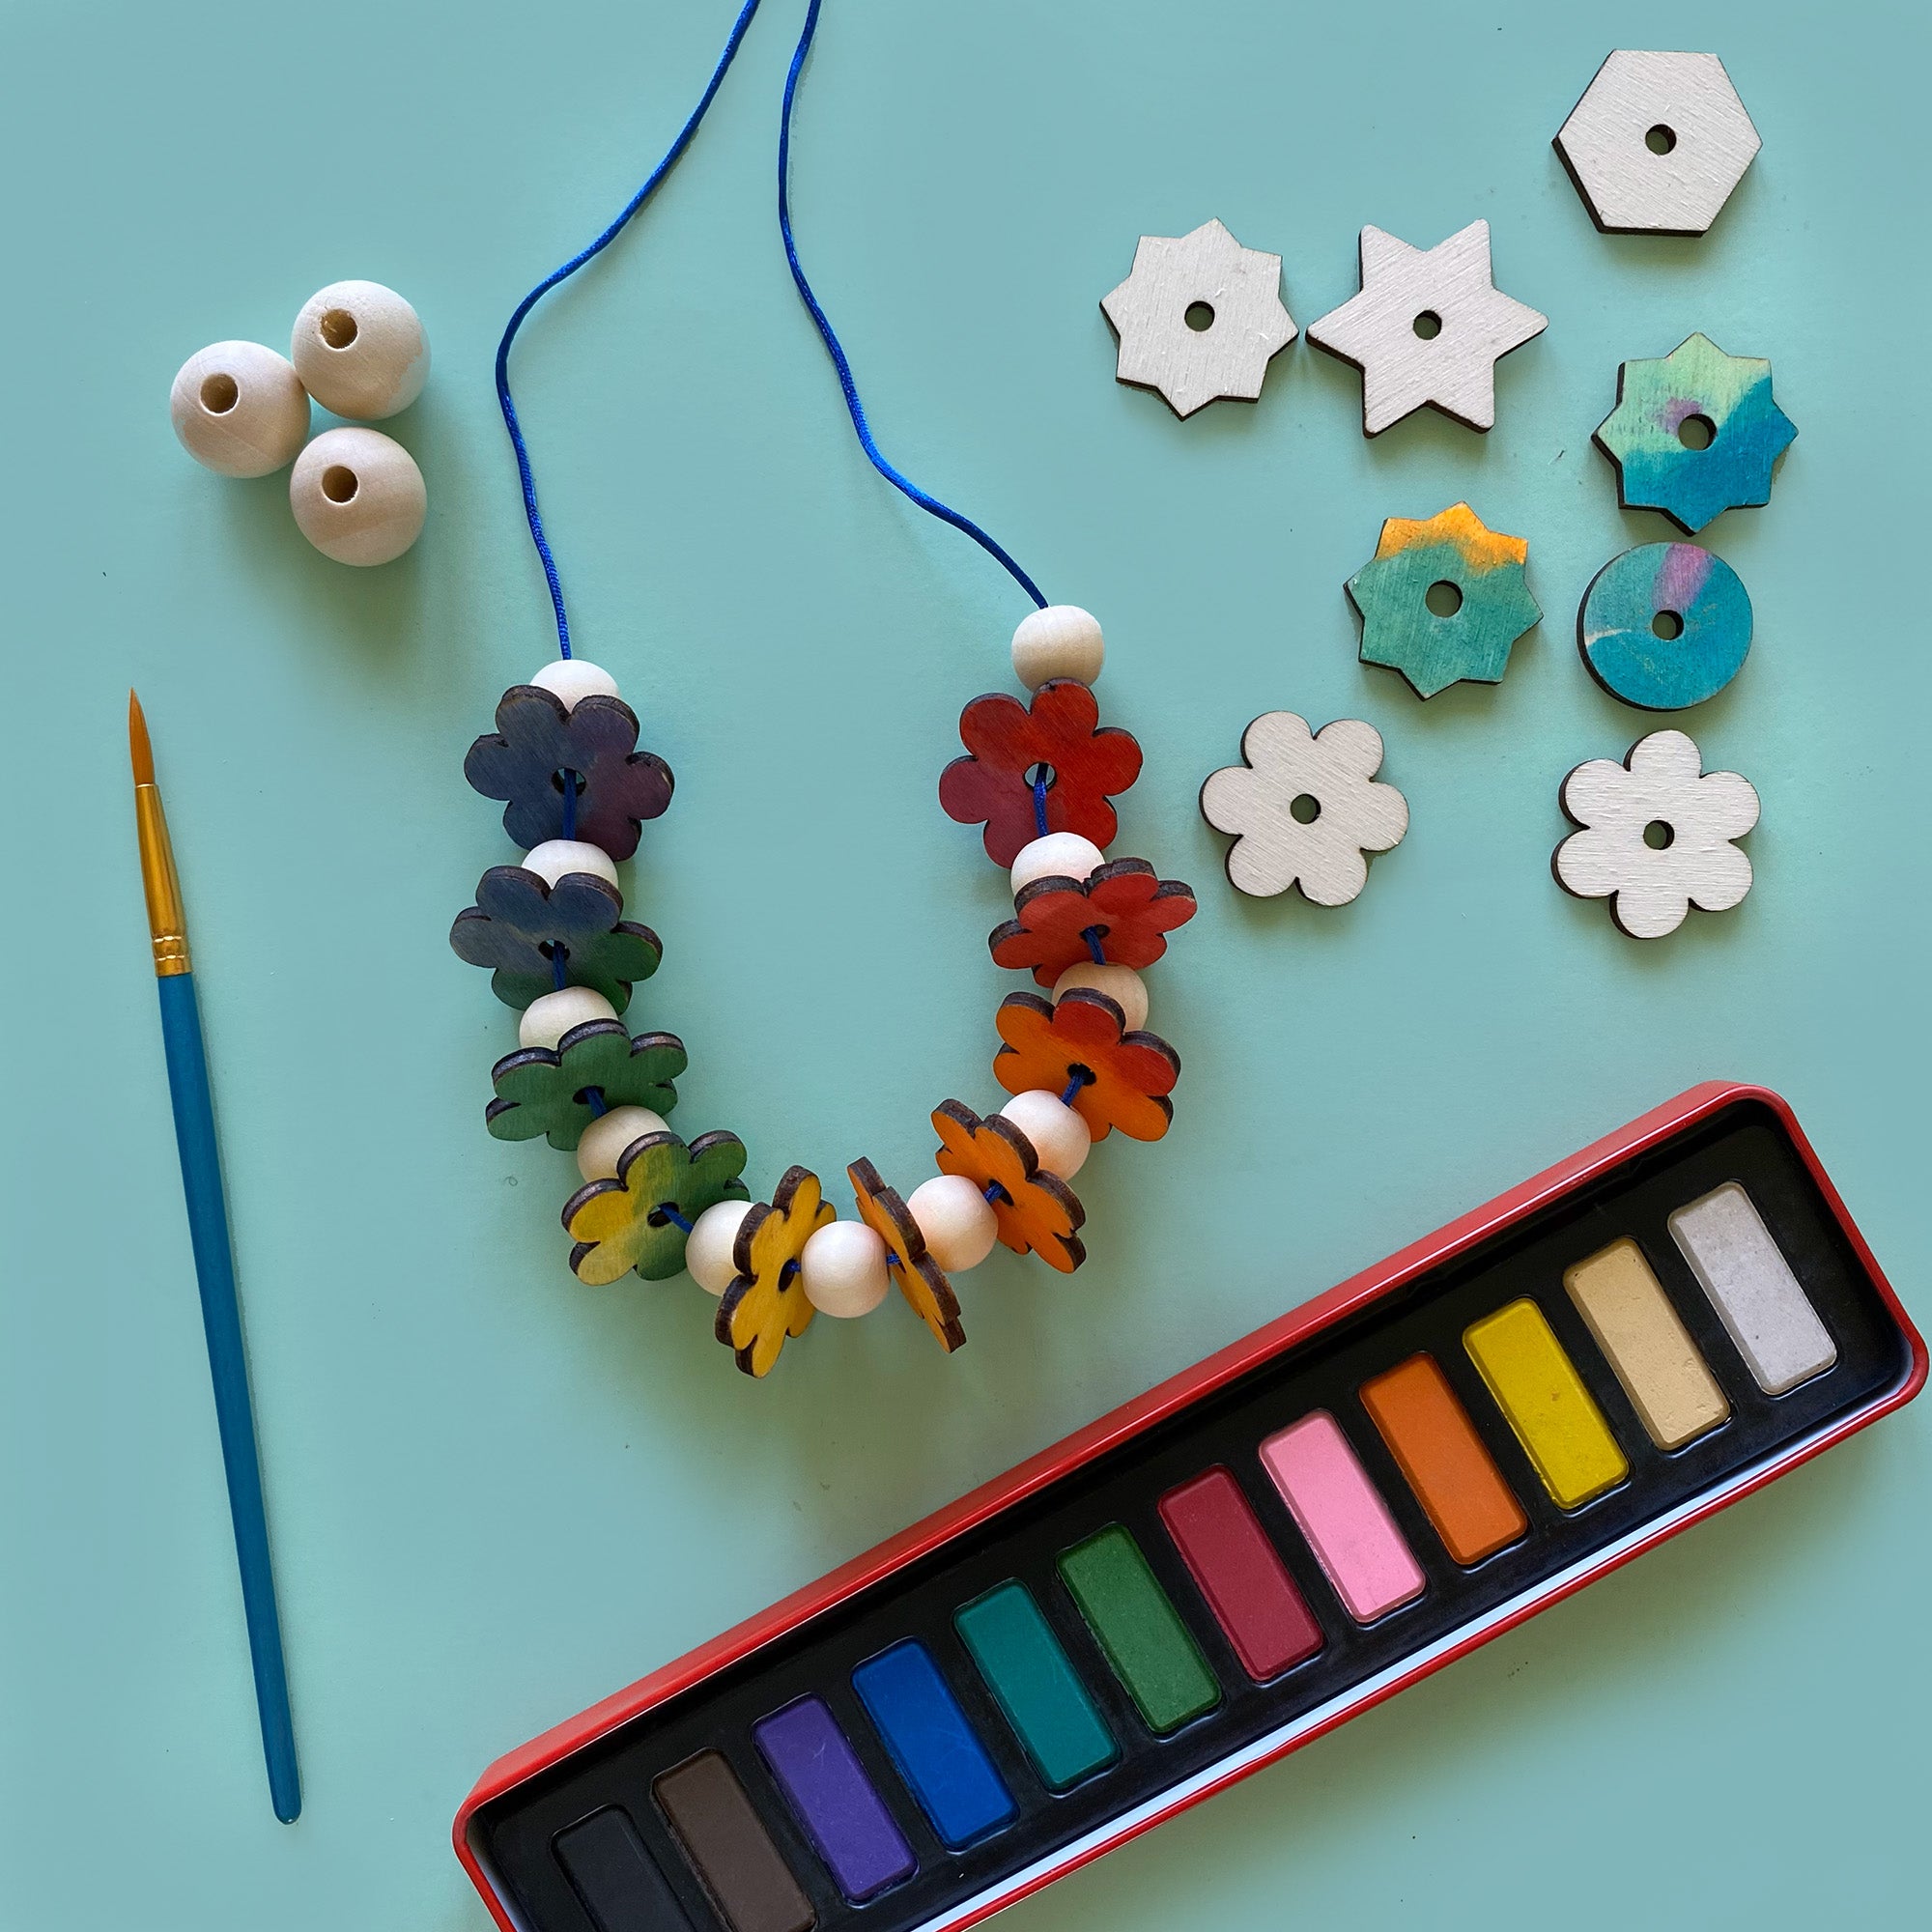 MINI MAD THINGS - Children's craft kits, art supplies and books.